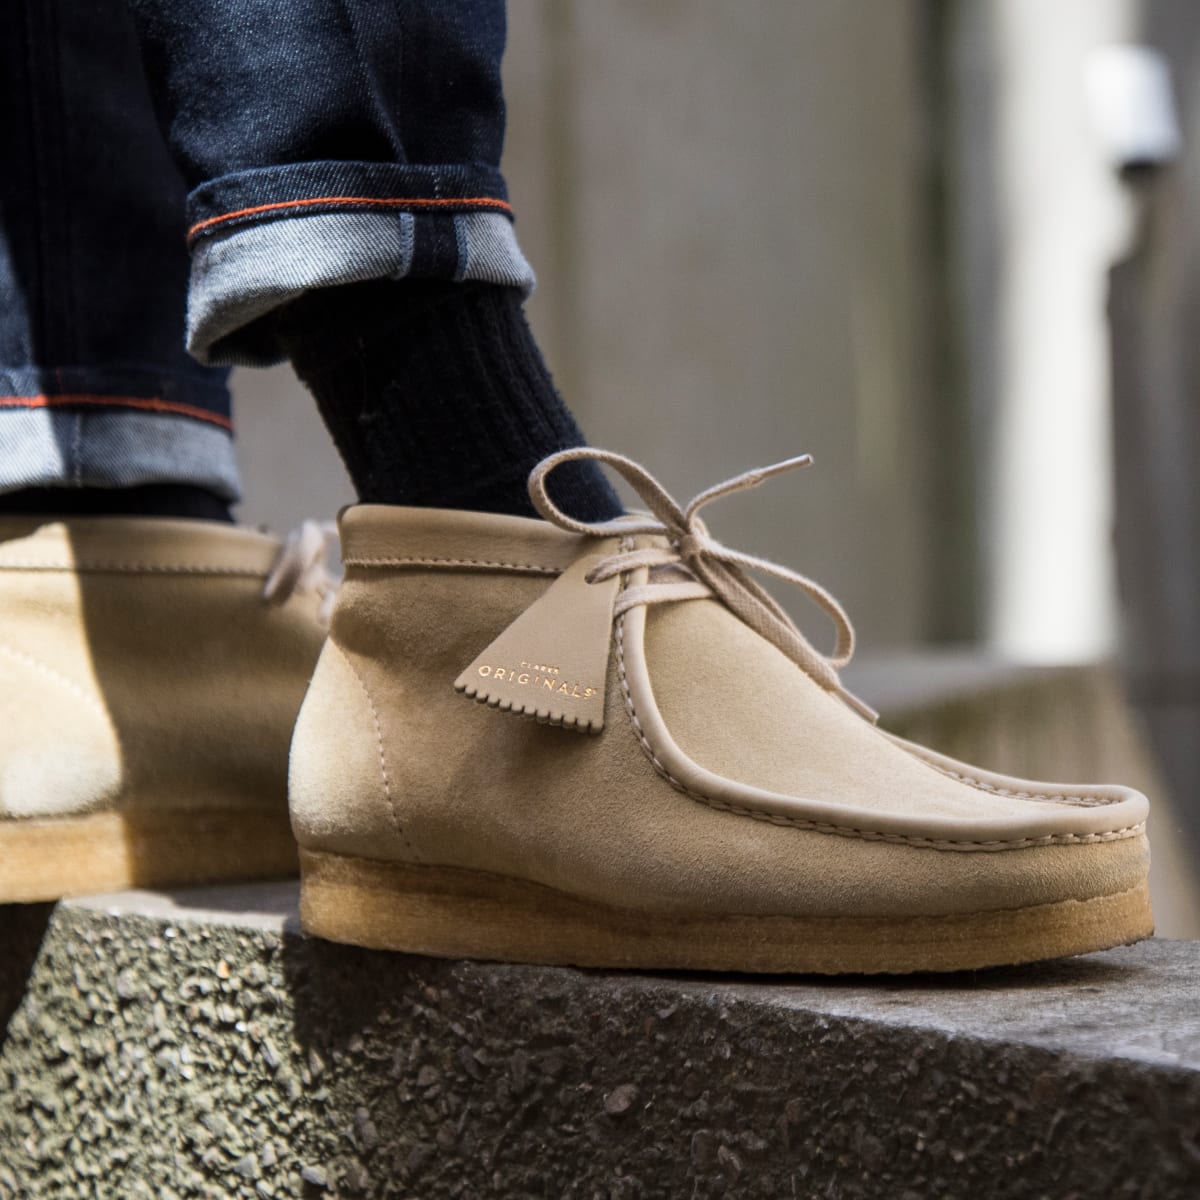 wallabees style shoes off 75% - online 